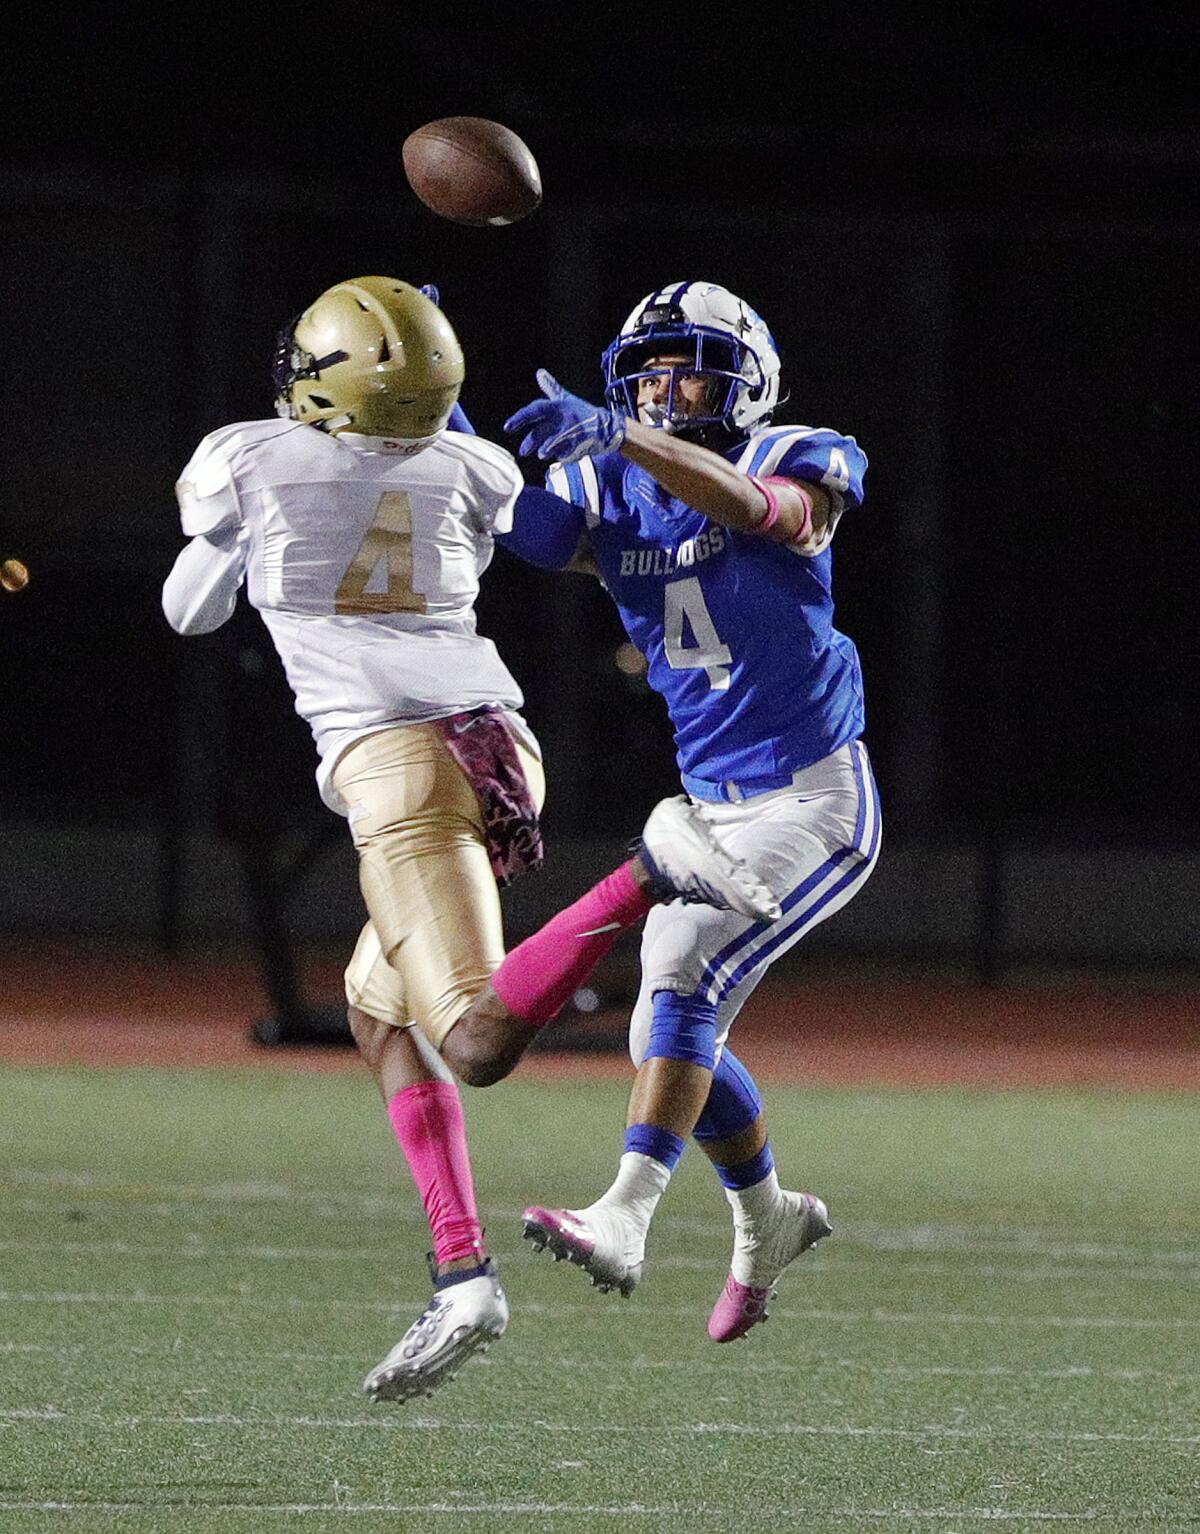 Muir passes deep right to awaiting Burbank defender Ian Miller just as Muir's Jamier Johnson gets under the ball for a pass that was nearly caught by both players in a Pacific League football game at Burroughs High School on Monday, October 14, 2019.